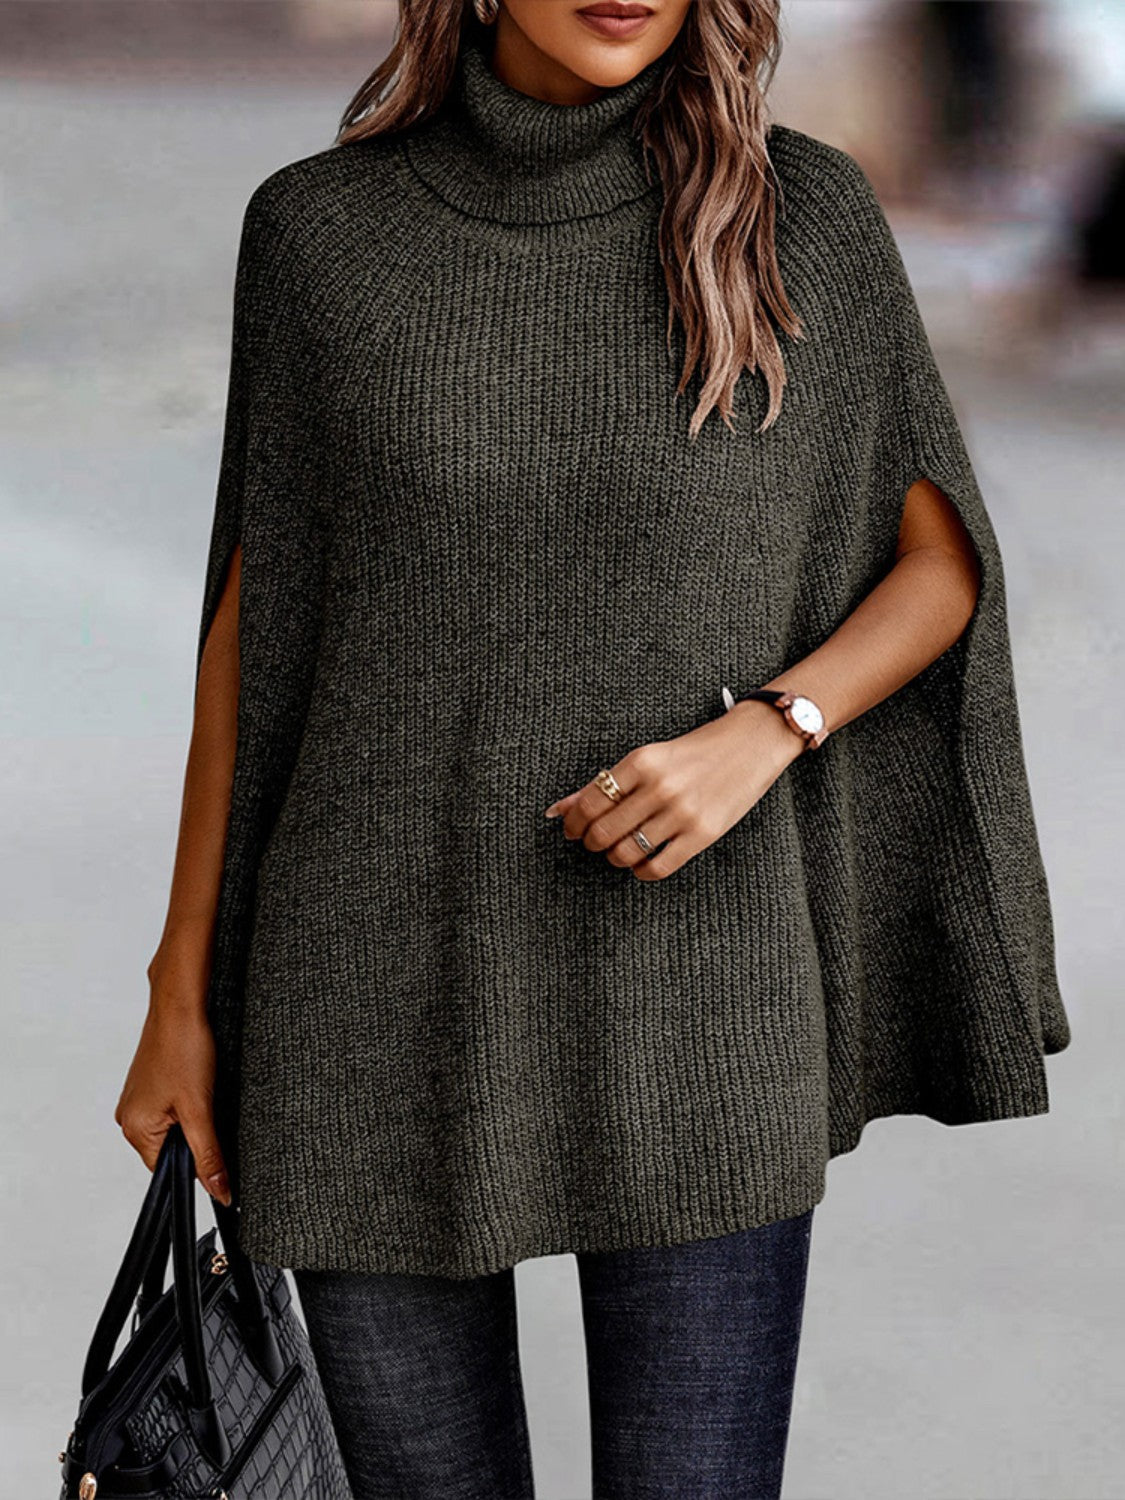 Shea Bought This Dolman Sleeve Poncho